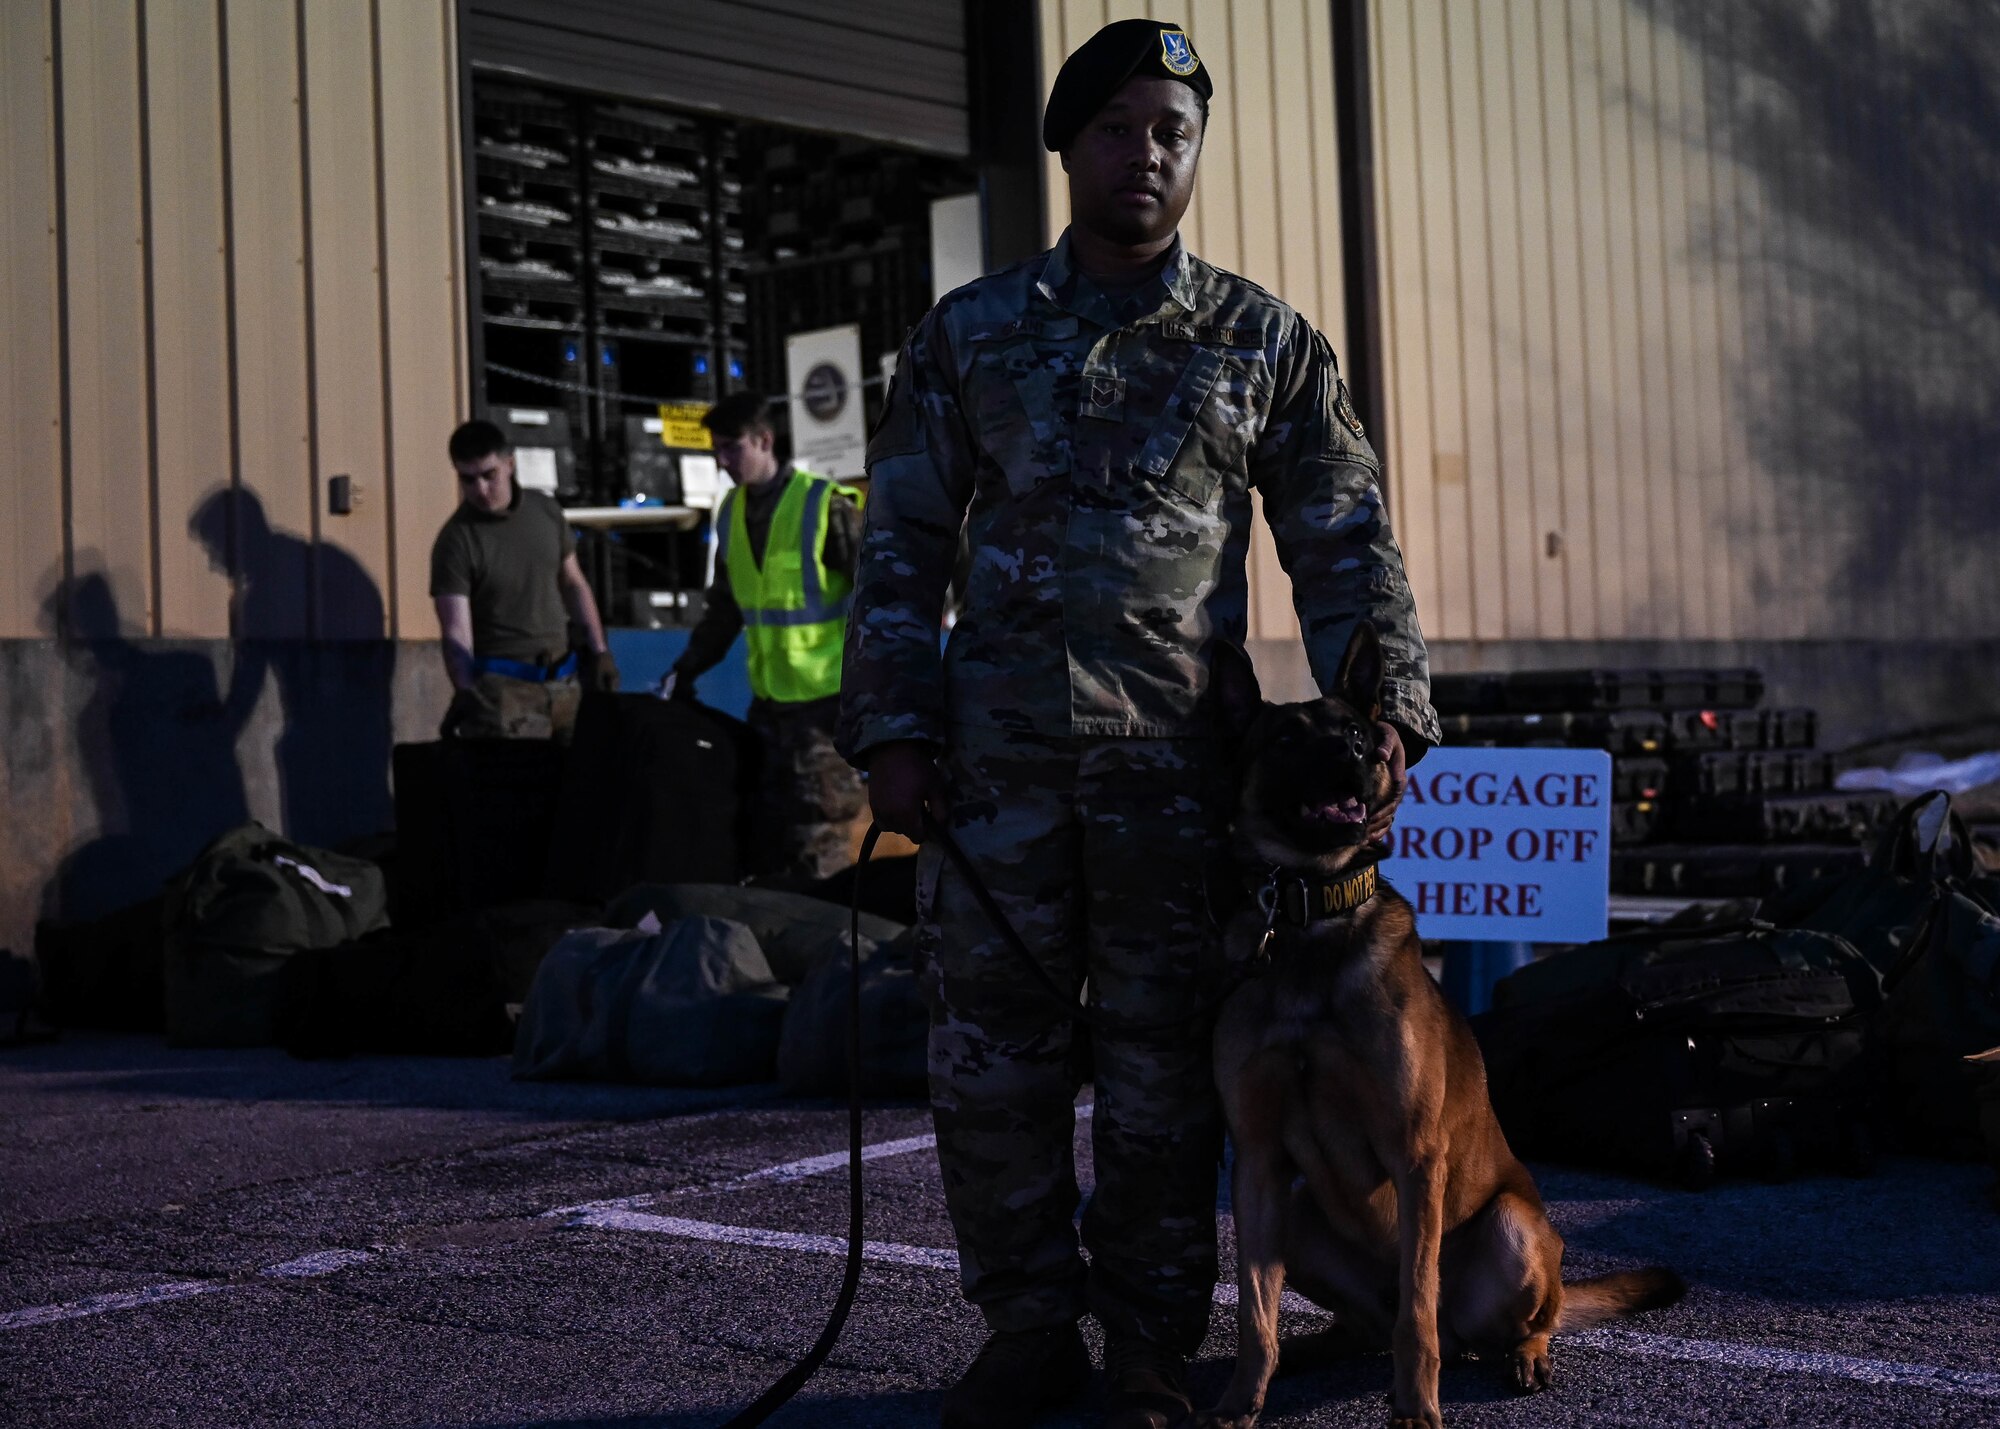 Staff Sgt. Kye Grant, 375th Security Forces Squadron military working dog handler, inspects luggage during a rapid deployment rehearsal on Scott Air Force Base, Illinois, March 16, 2022. This deployment mobility rehearsal emphasizes readiness of command and control procedures and continuity of operations in a simulated contested environment. (U.S. Air Force photo by Airman 1st Class Mark Sulaica)